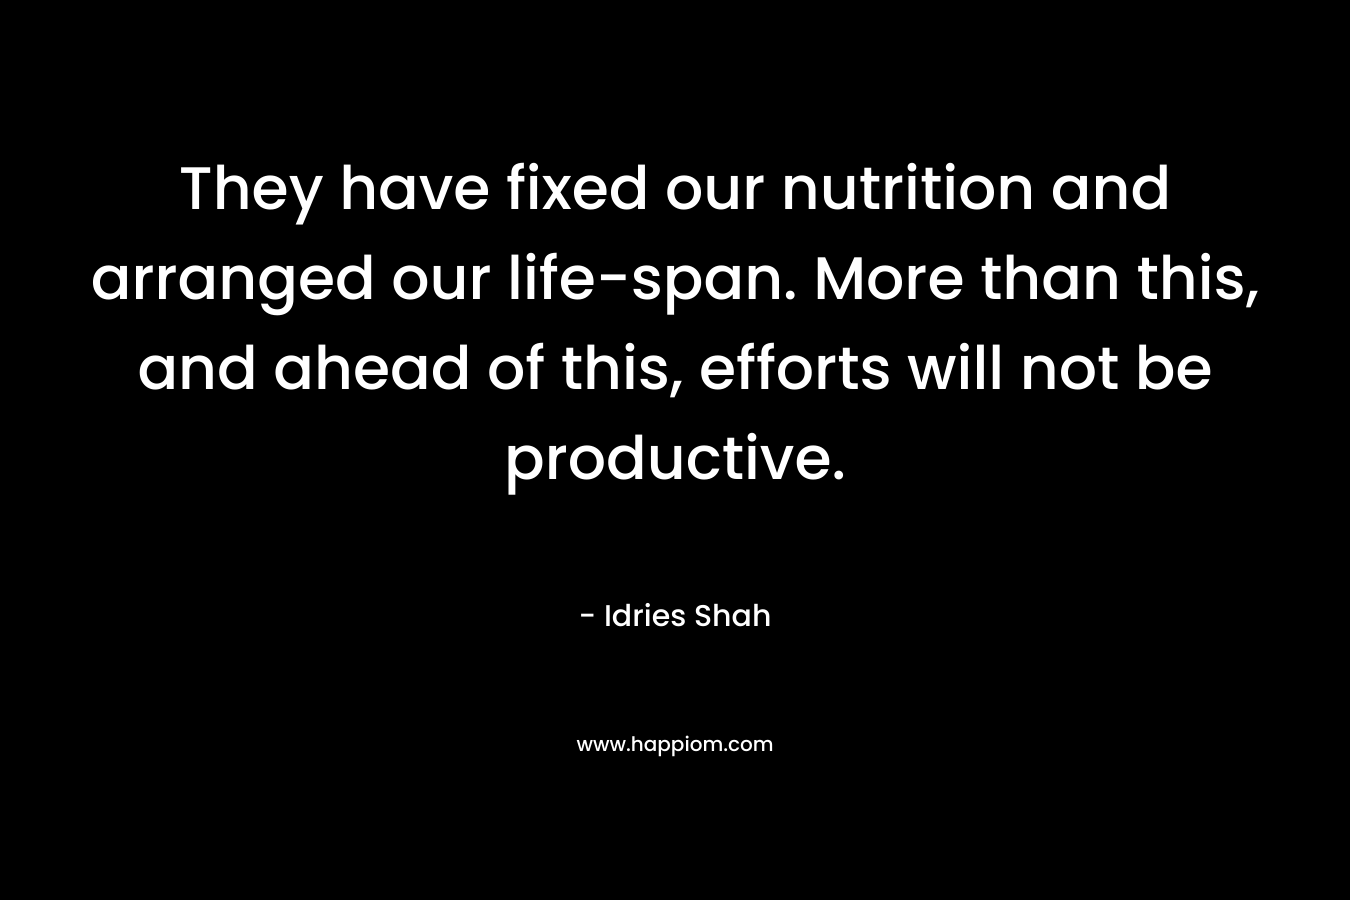 They have fixed our nutrition and arranged our life-span. More than this, and ahead of this, efforts will not be productive.